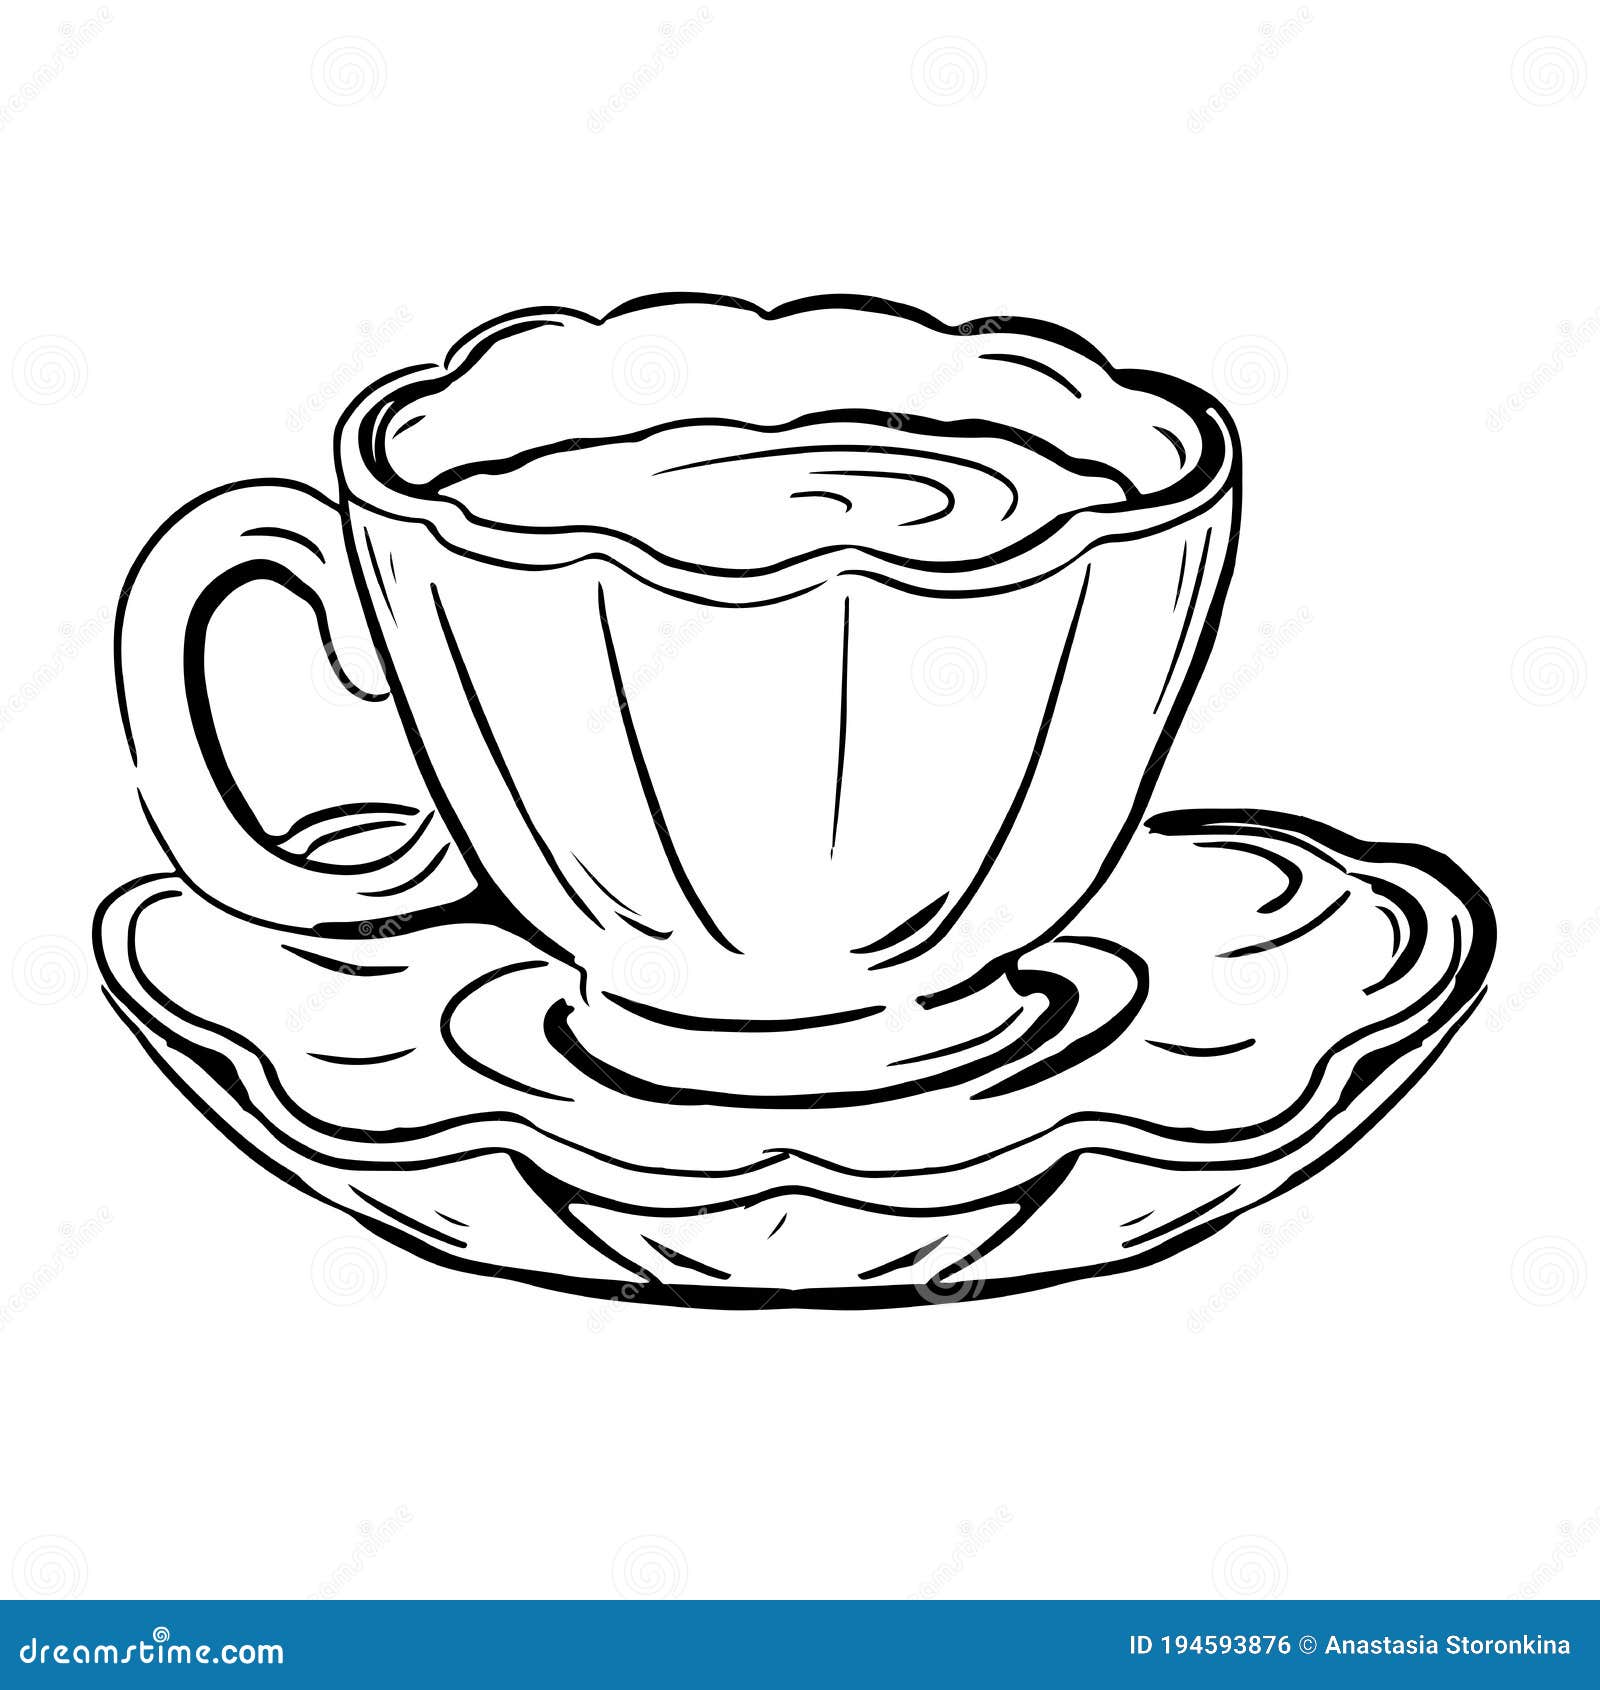 How to draw cup and saucer for beginners step by step/drawing cup and saucer(very  easy) - YouTube